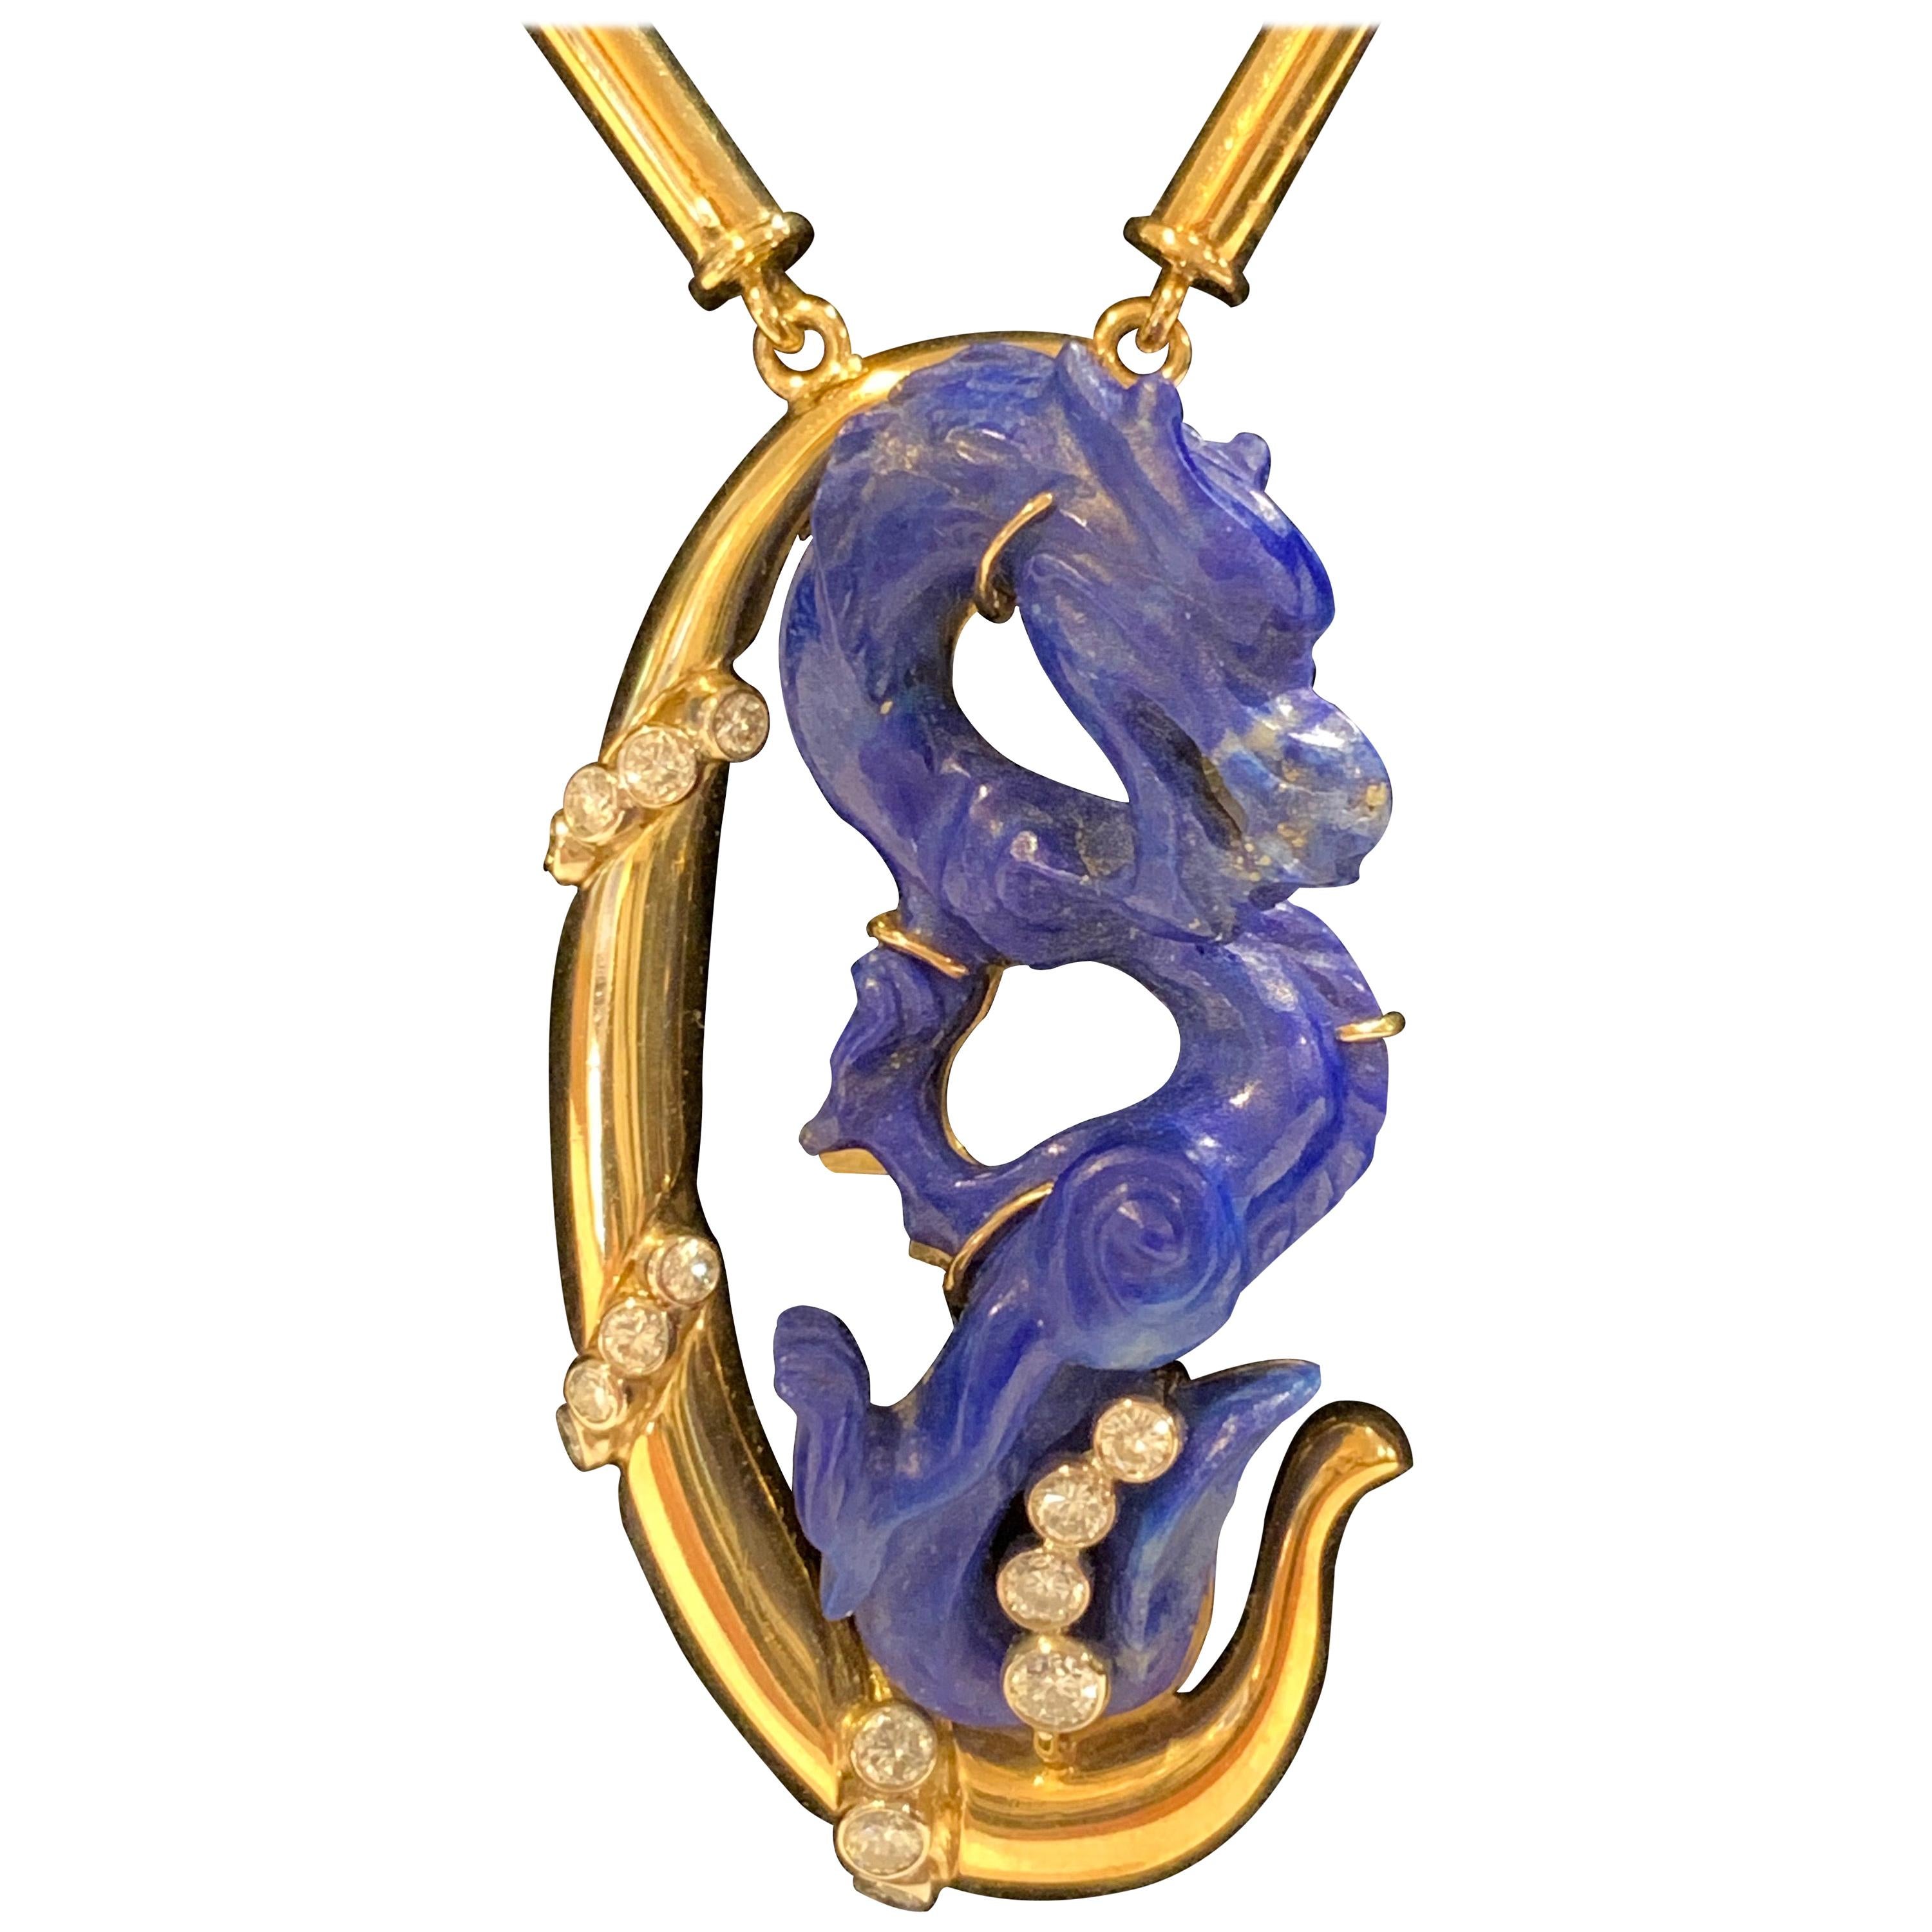 Carved Lapis Dragon in 18k Gold 28.6 Dwt Handcrafted Diamond Pendant and chain